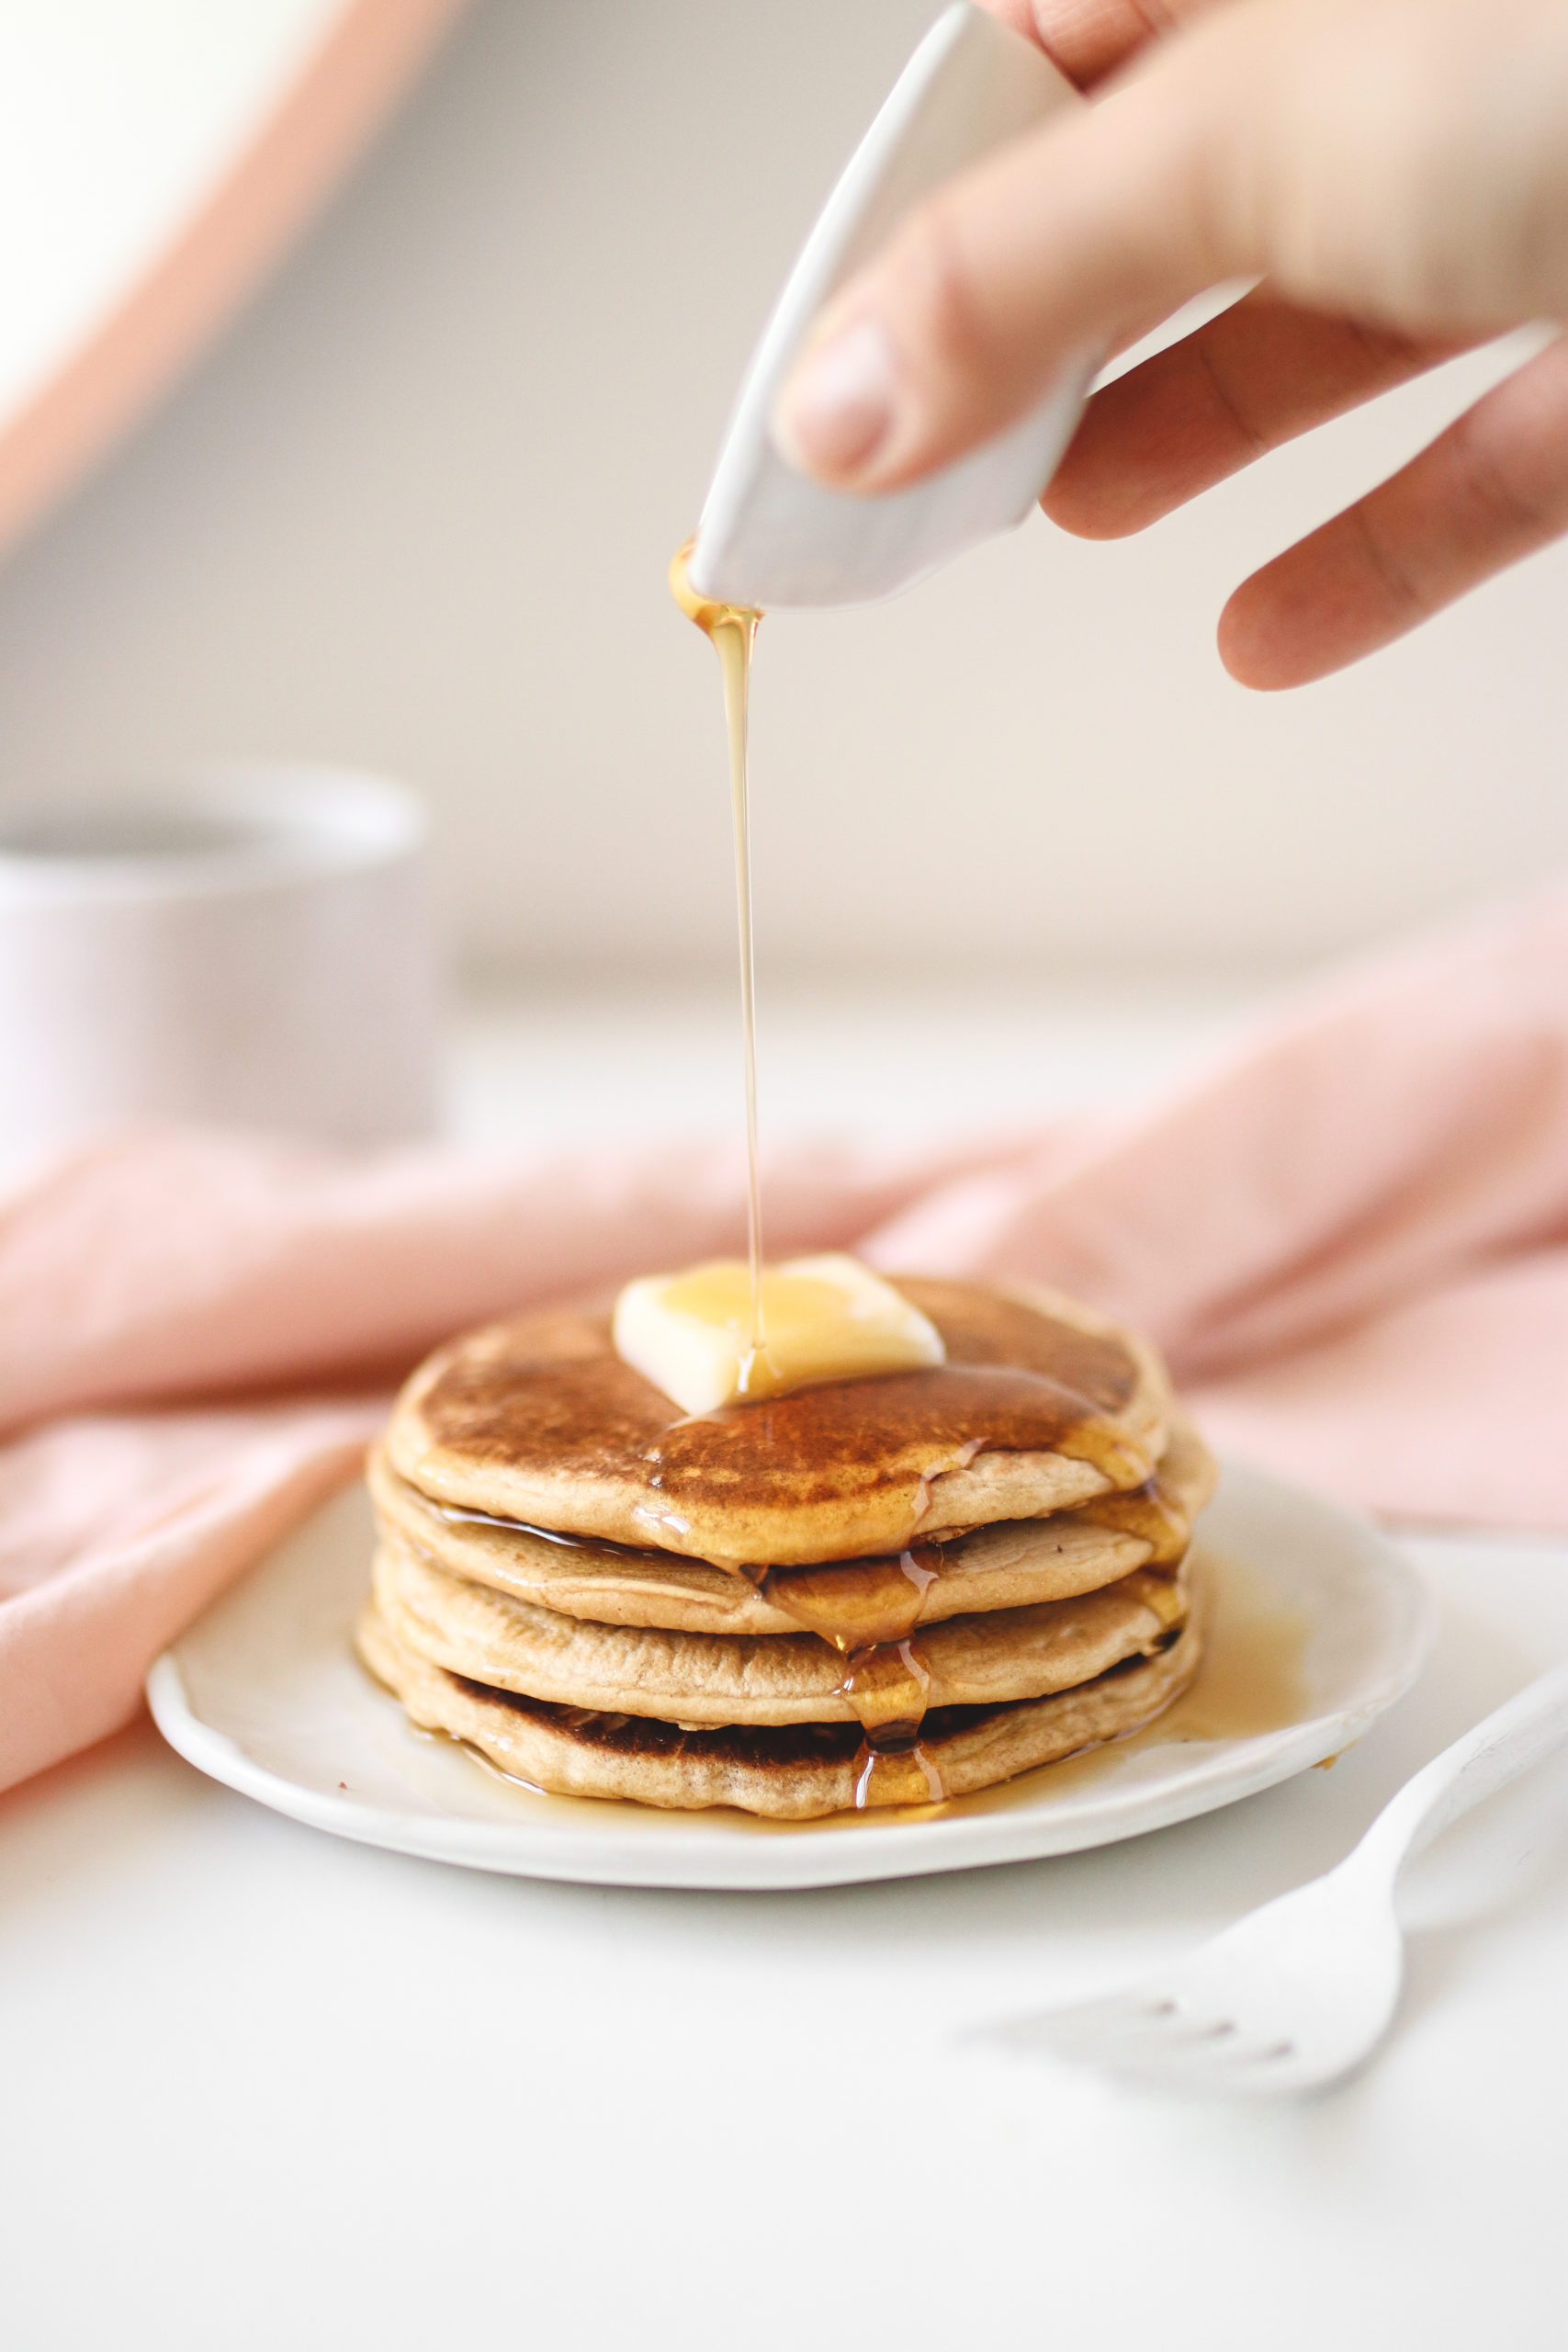 a hand pouring syrup over a stack of chickpea flour pancakes.